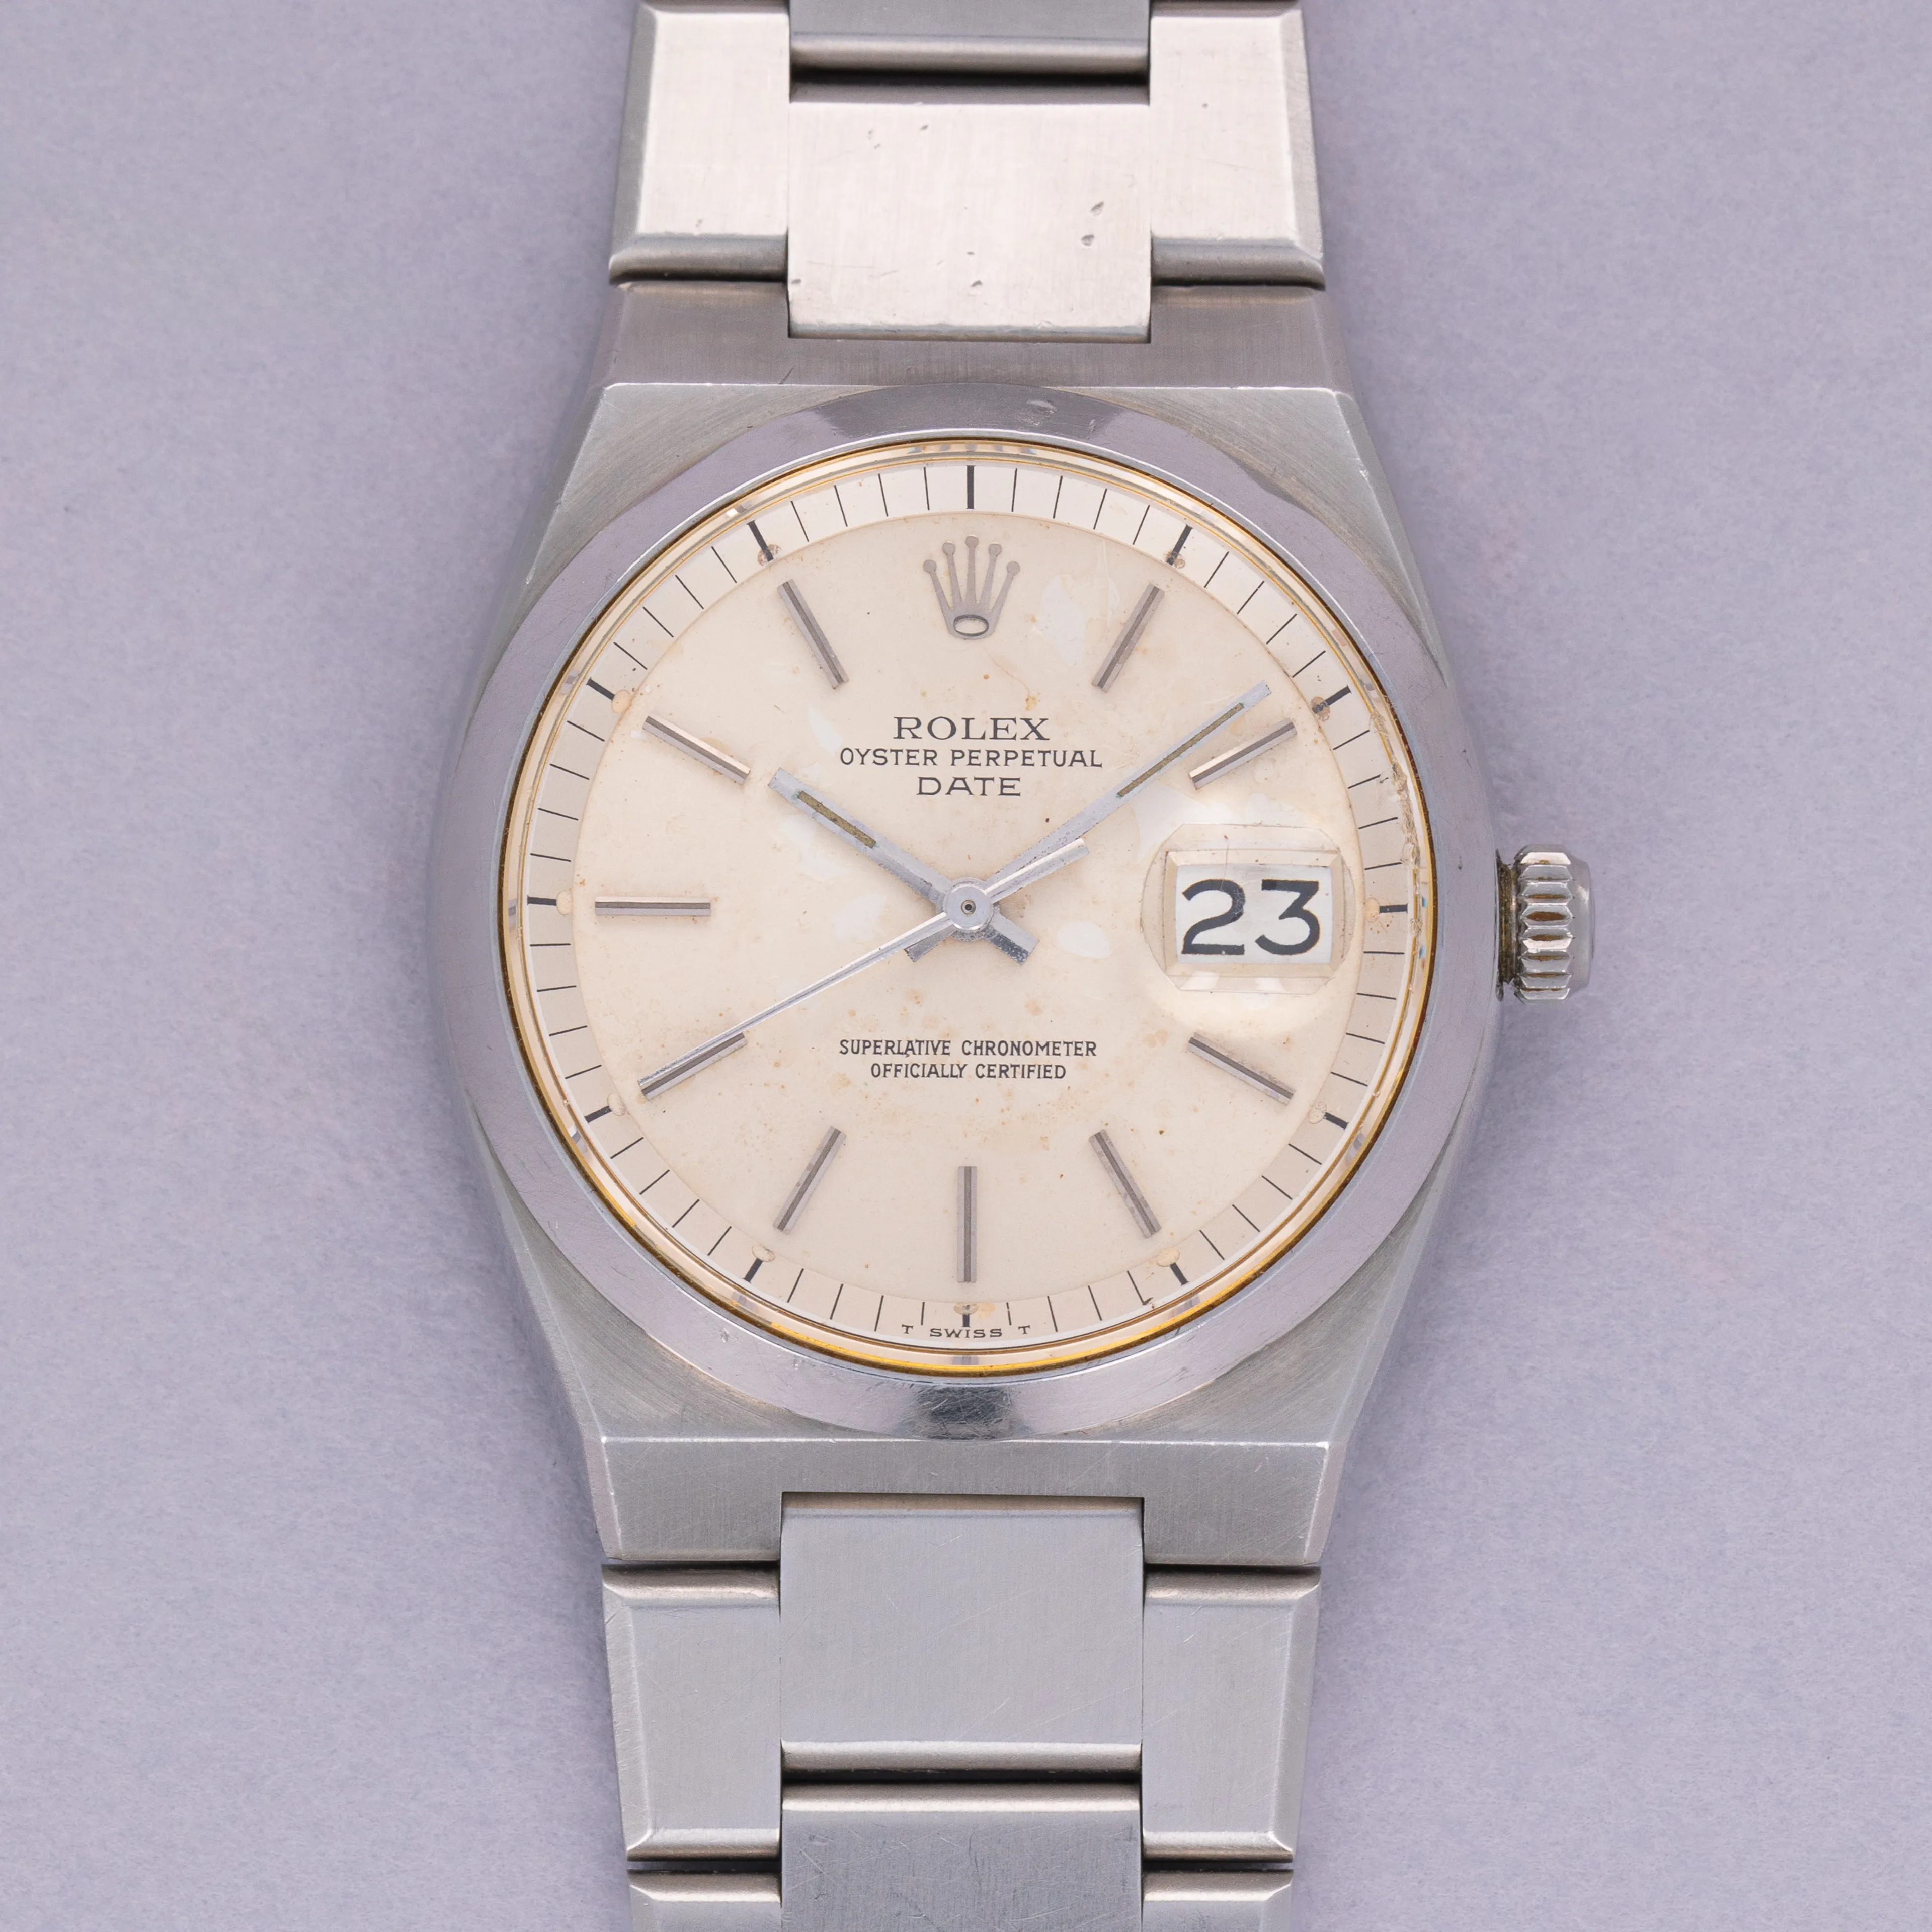 Rolex Oyster Perpetual Date 1530 nullmm